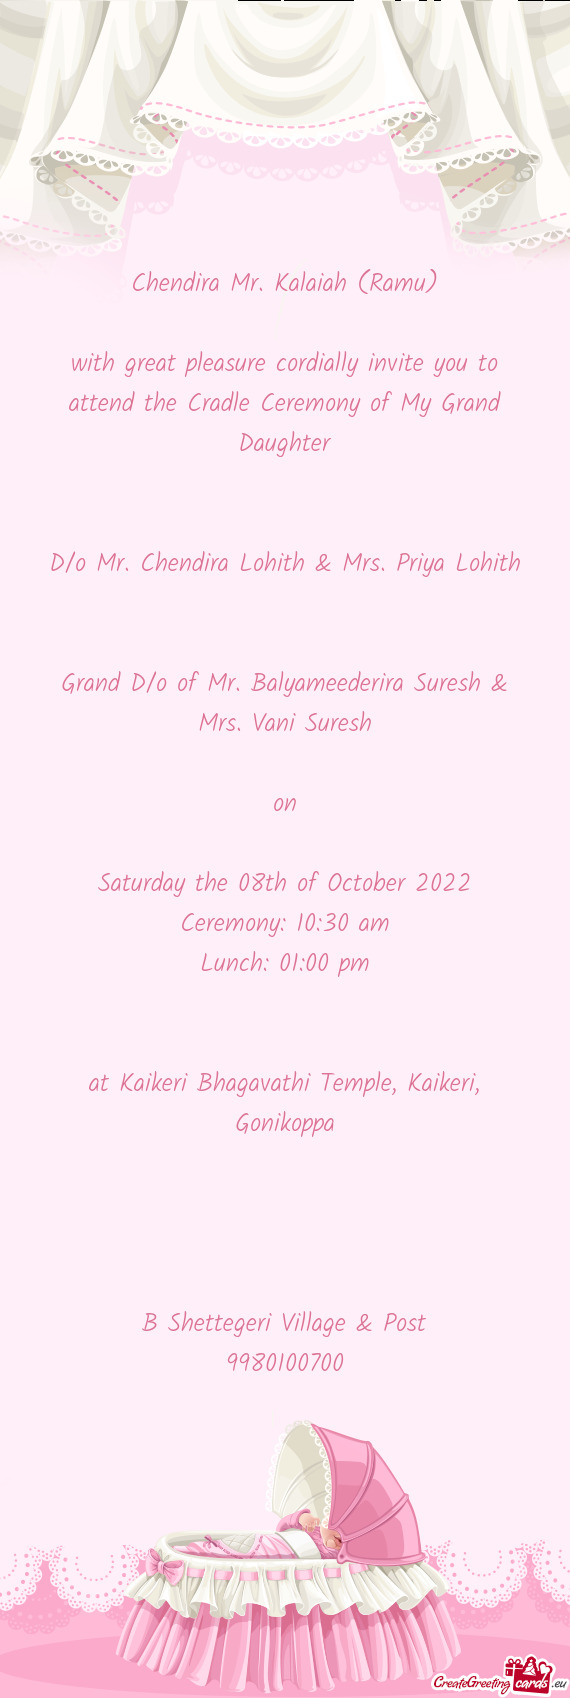 With great pleasure cordially invite you to attend the Cradle Ceremony of My Grand Daughter